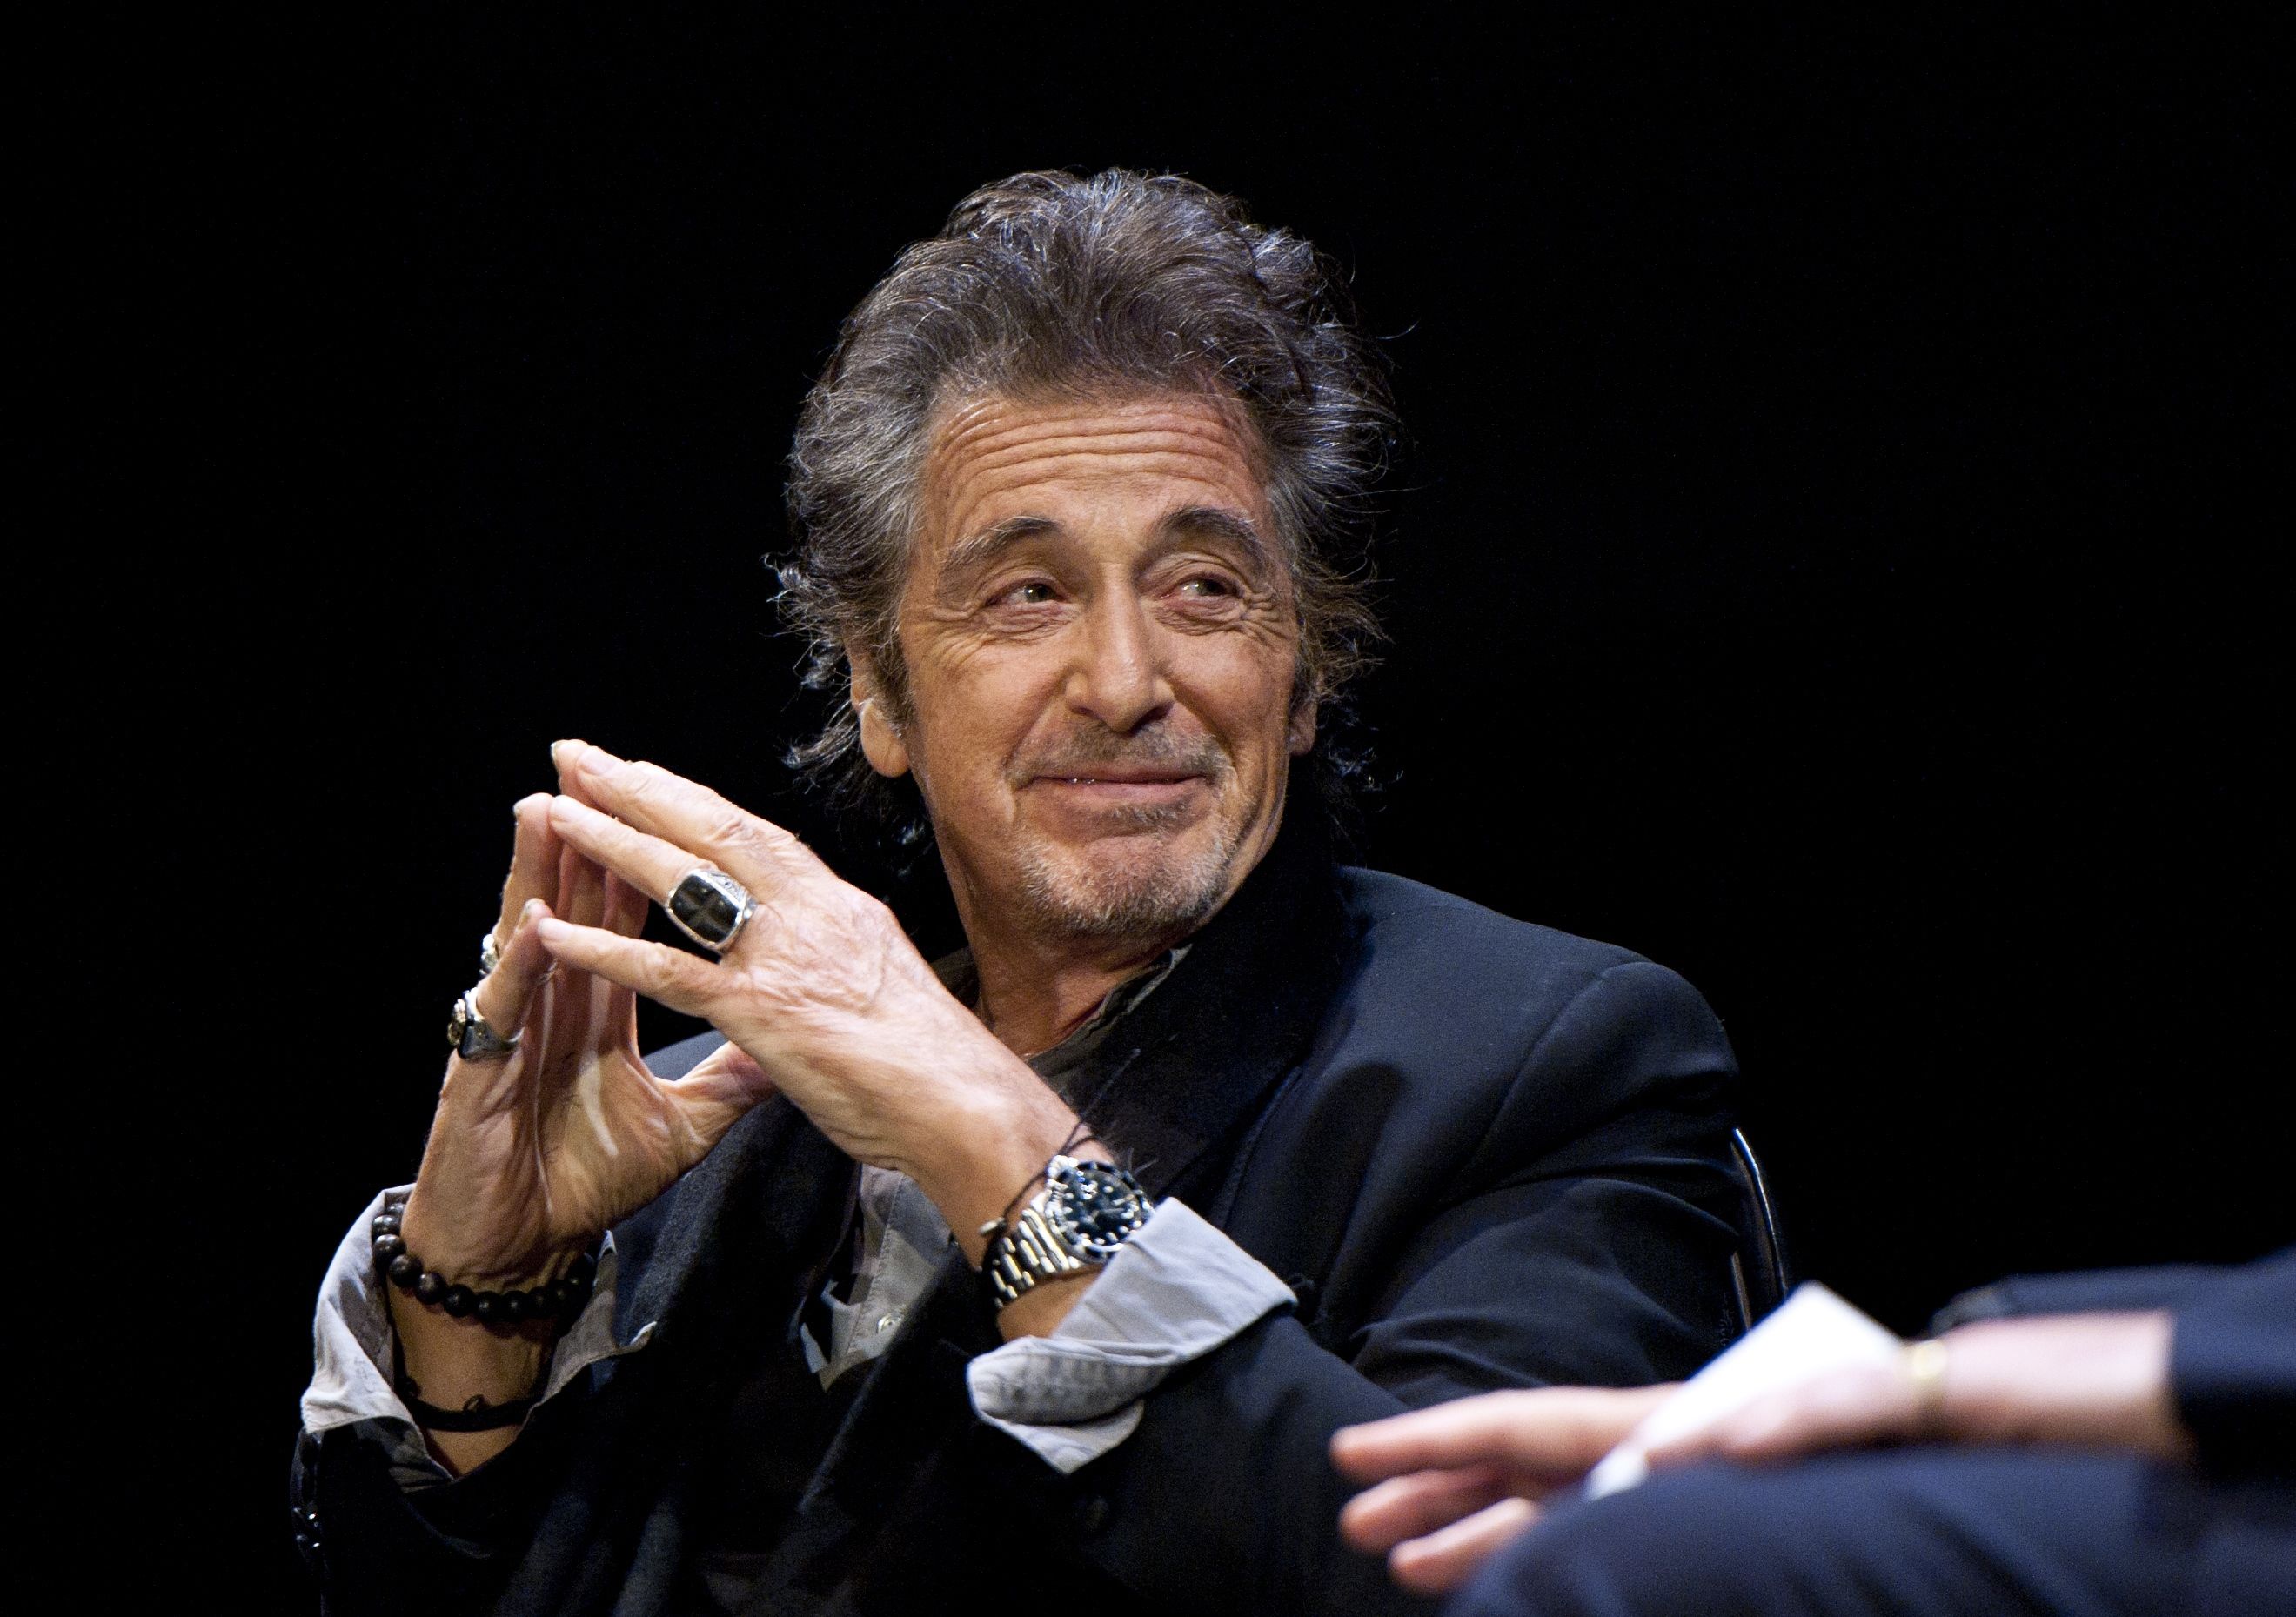 LONDON, ENGLAND - MAY 22: (EDITORS NOTE: Image has been digitally manipulated) Actor Al Pacino during An Evening With Al Pacino at Eventim Apollo on May 22, 2015 in London, England. (Photo by Eamonn M. McCormack/Getty Images)